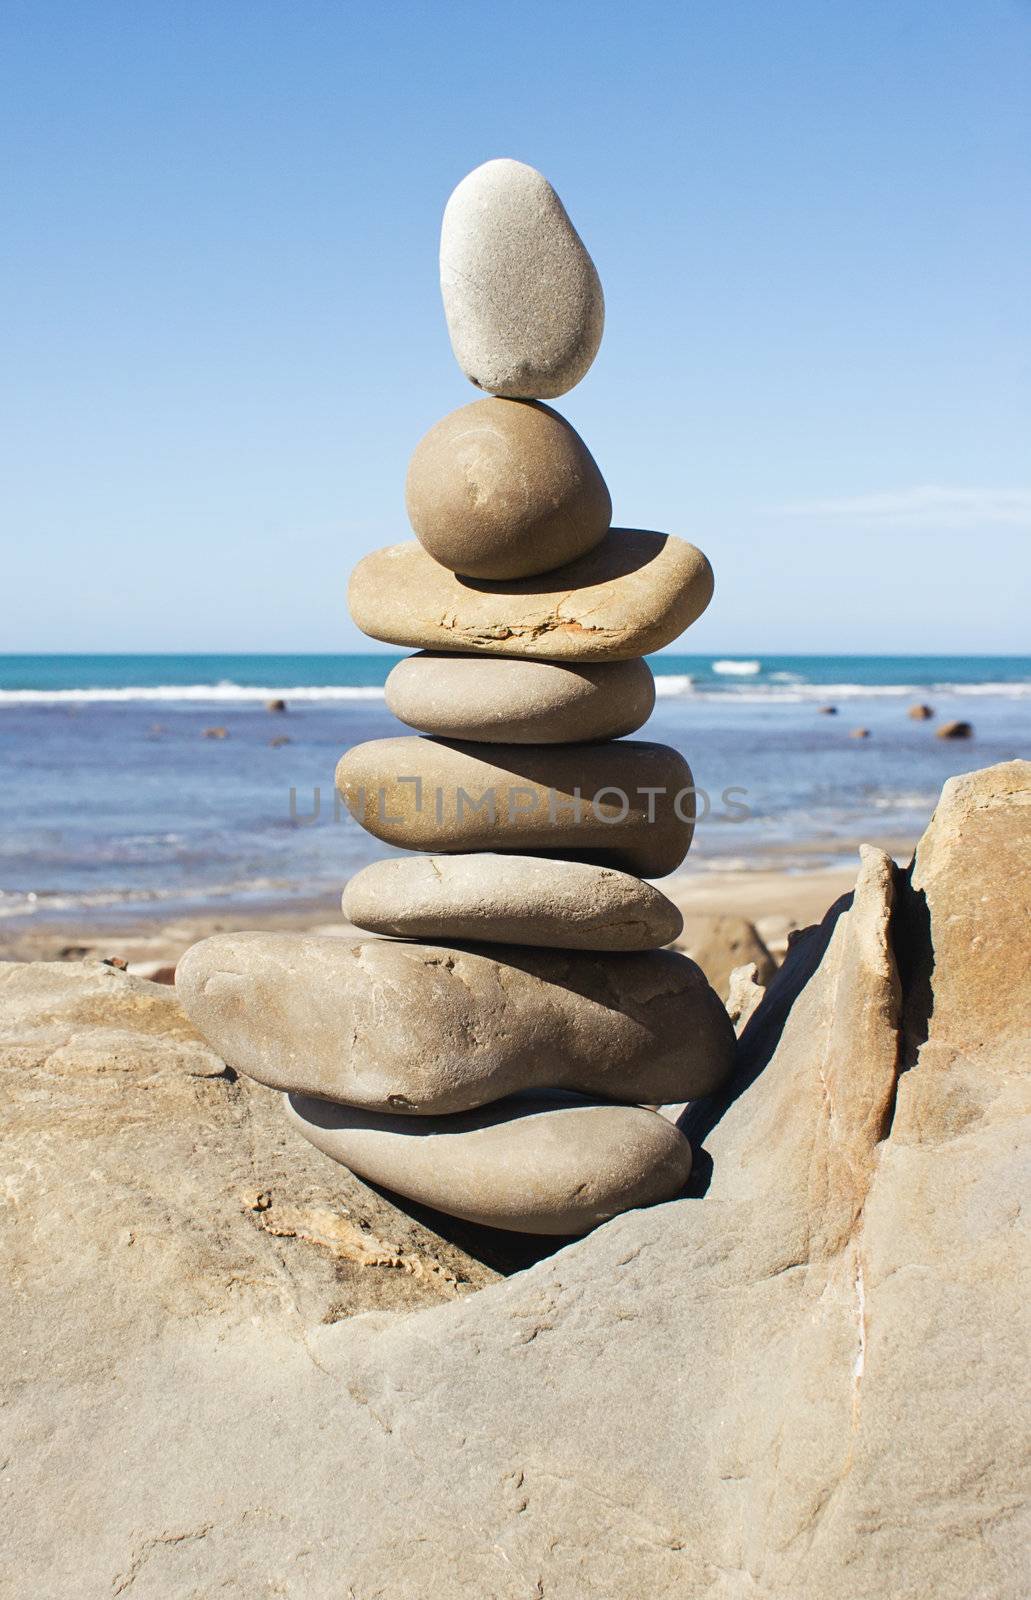 A stack of balanced stones with the beach in the background